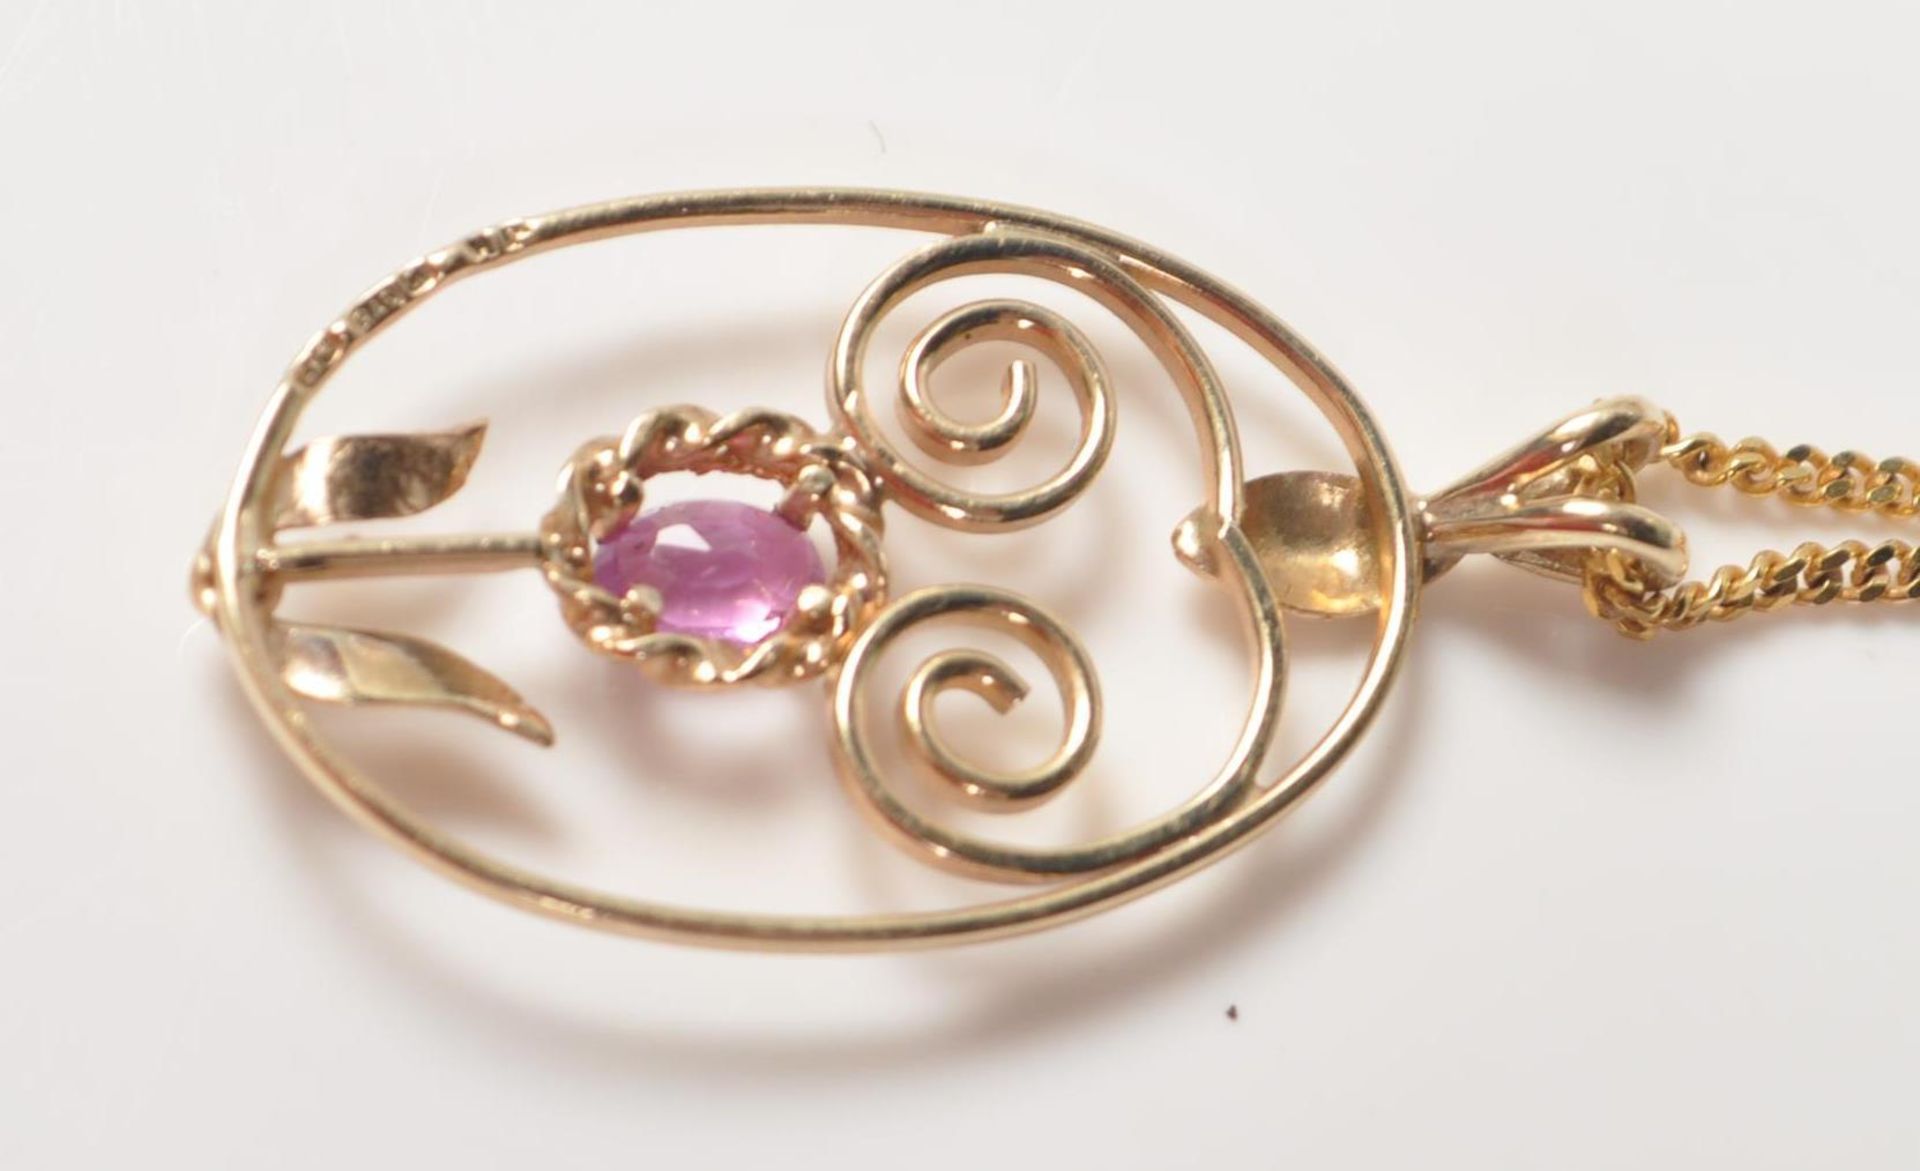 9CT GOLD AND PINK STONE PENDANT NECKLACE - Image 5 of 7